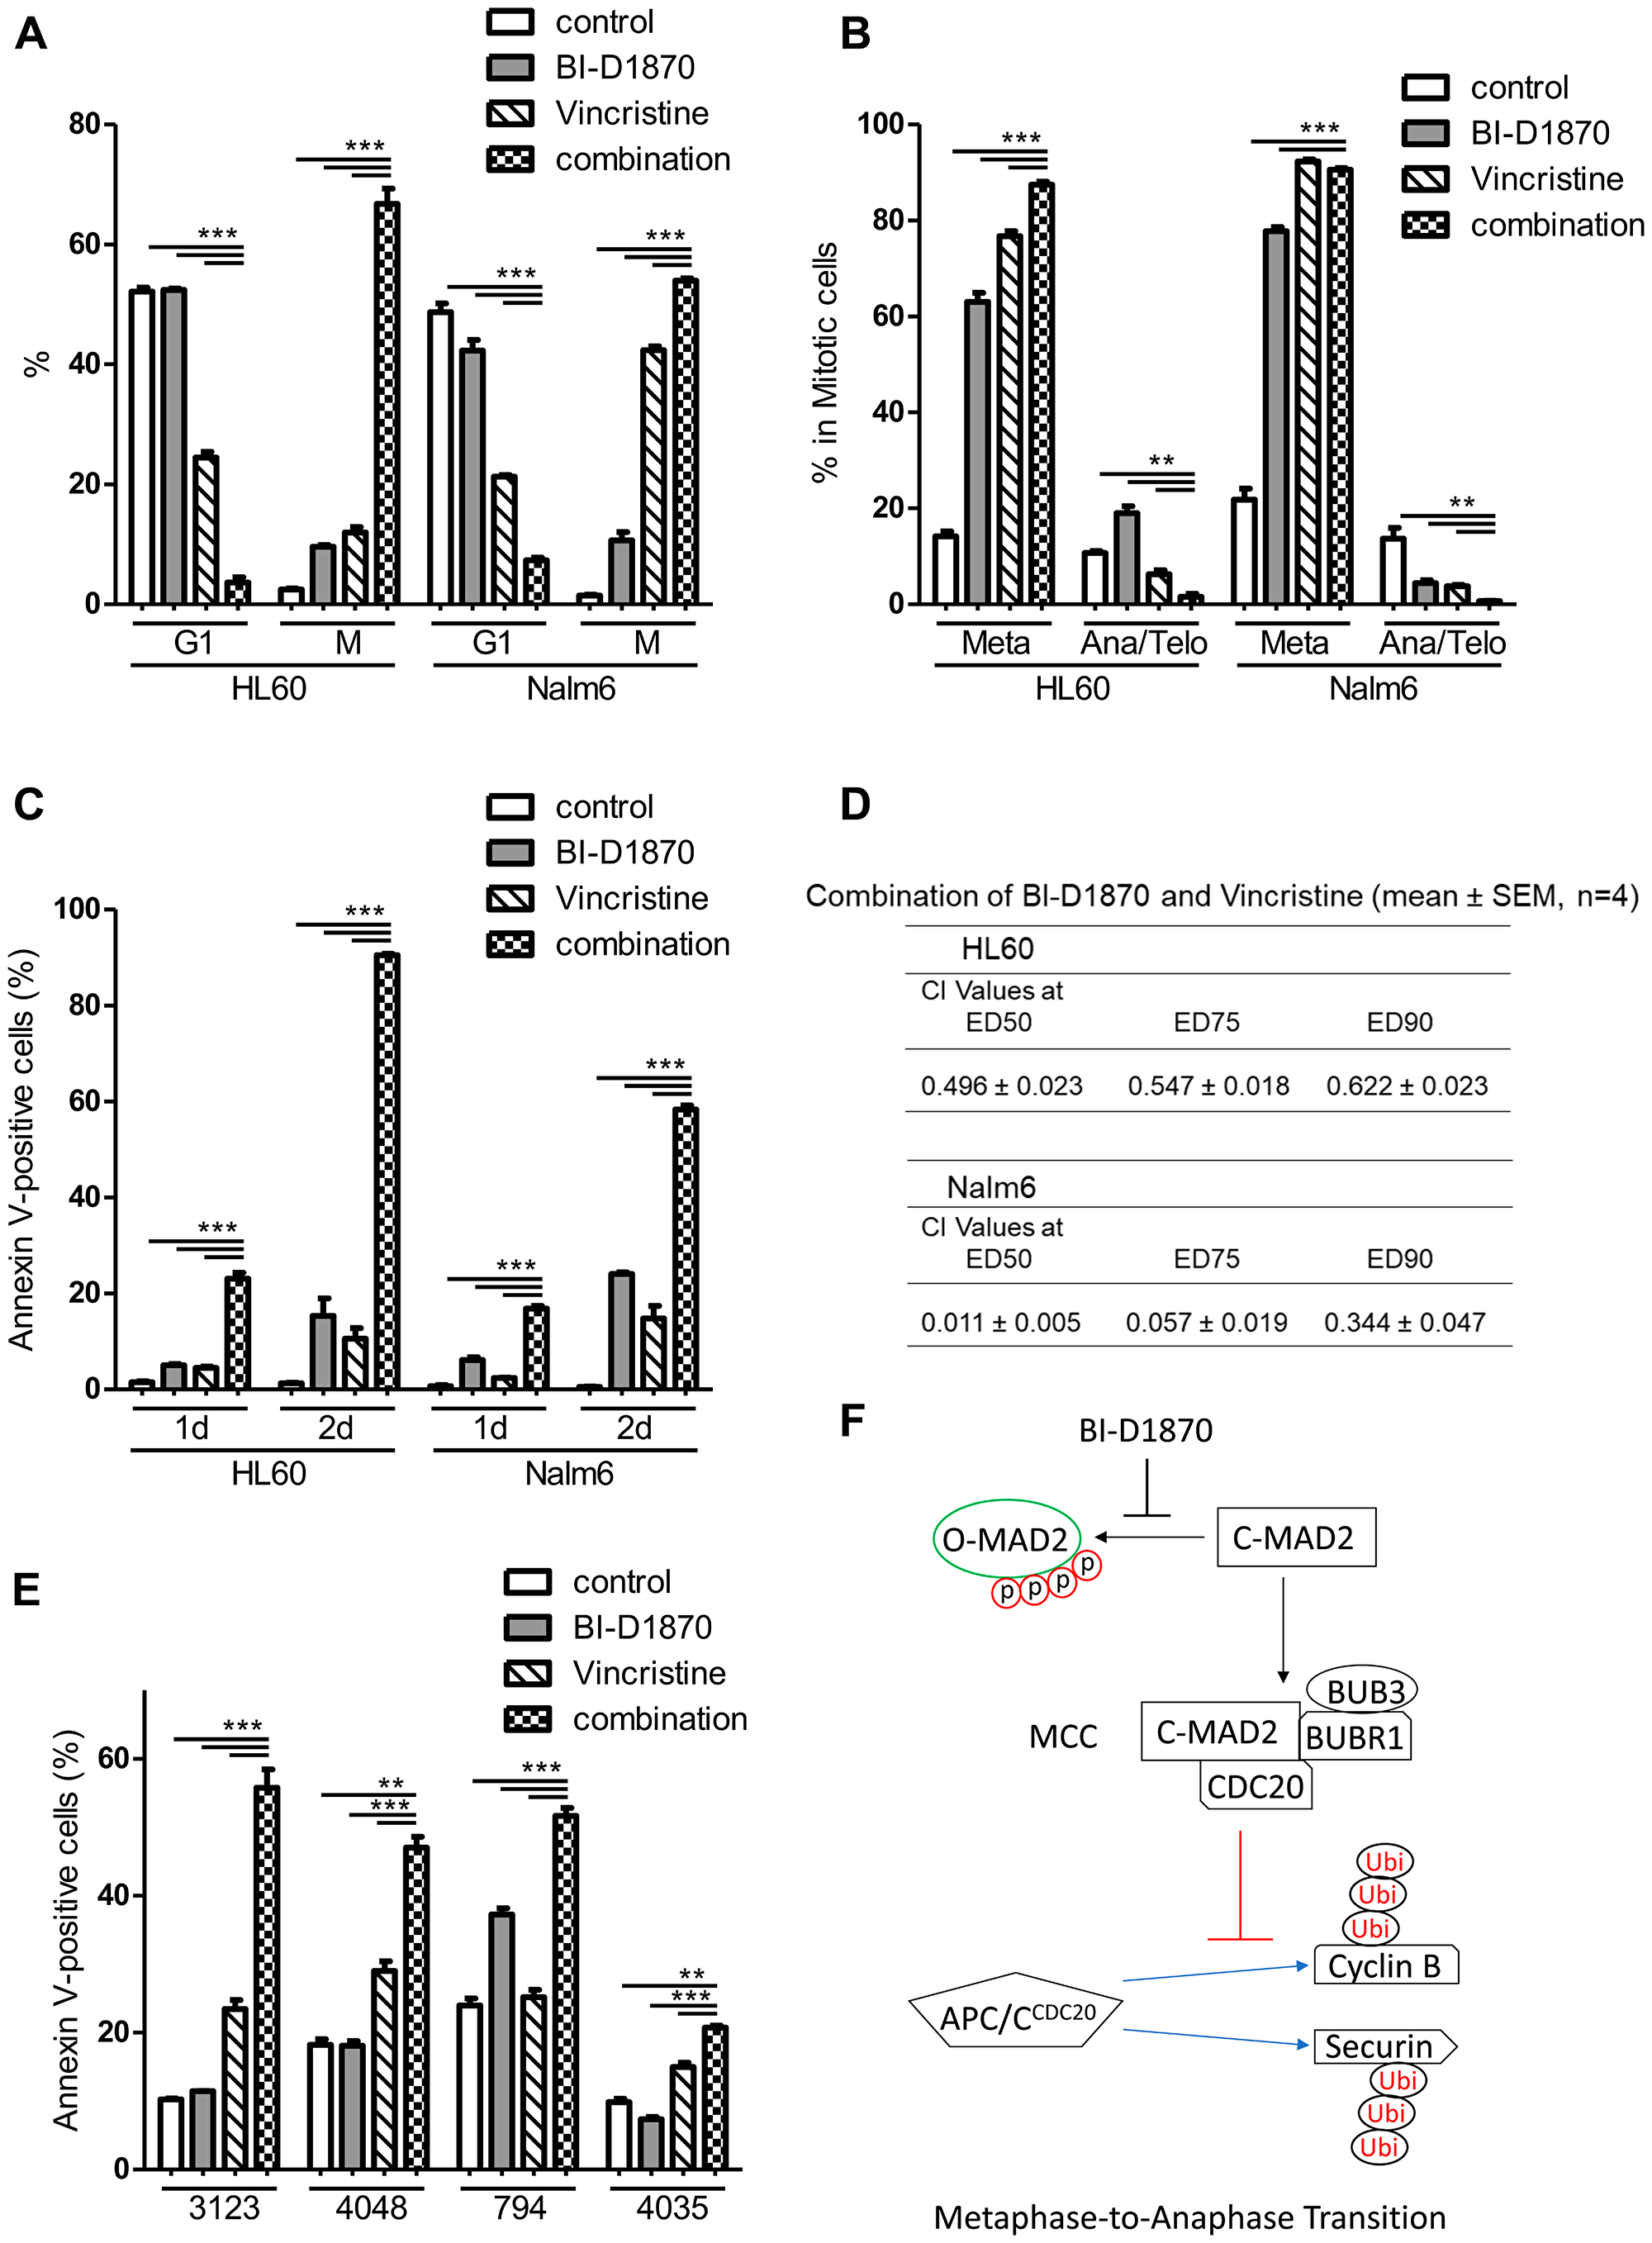 BI-D1870 in combination with vincristine increase metaphase arrest and apoptosis synergistically.